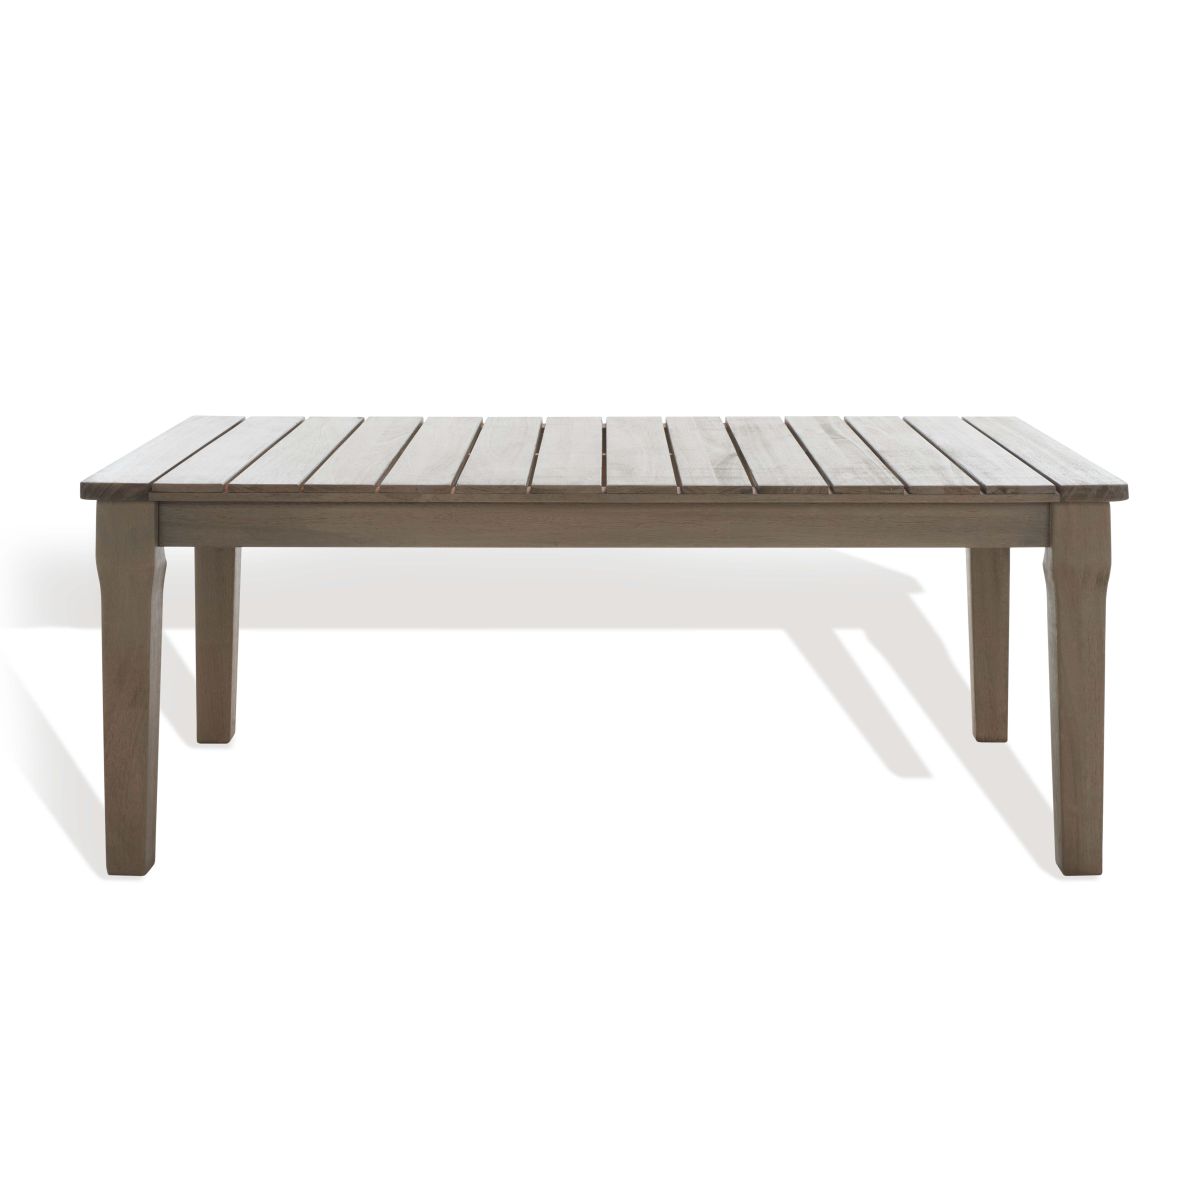 Safavieh Couture Martinique Wood Patio Coffee Table